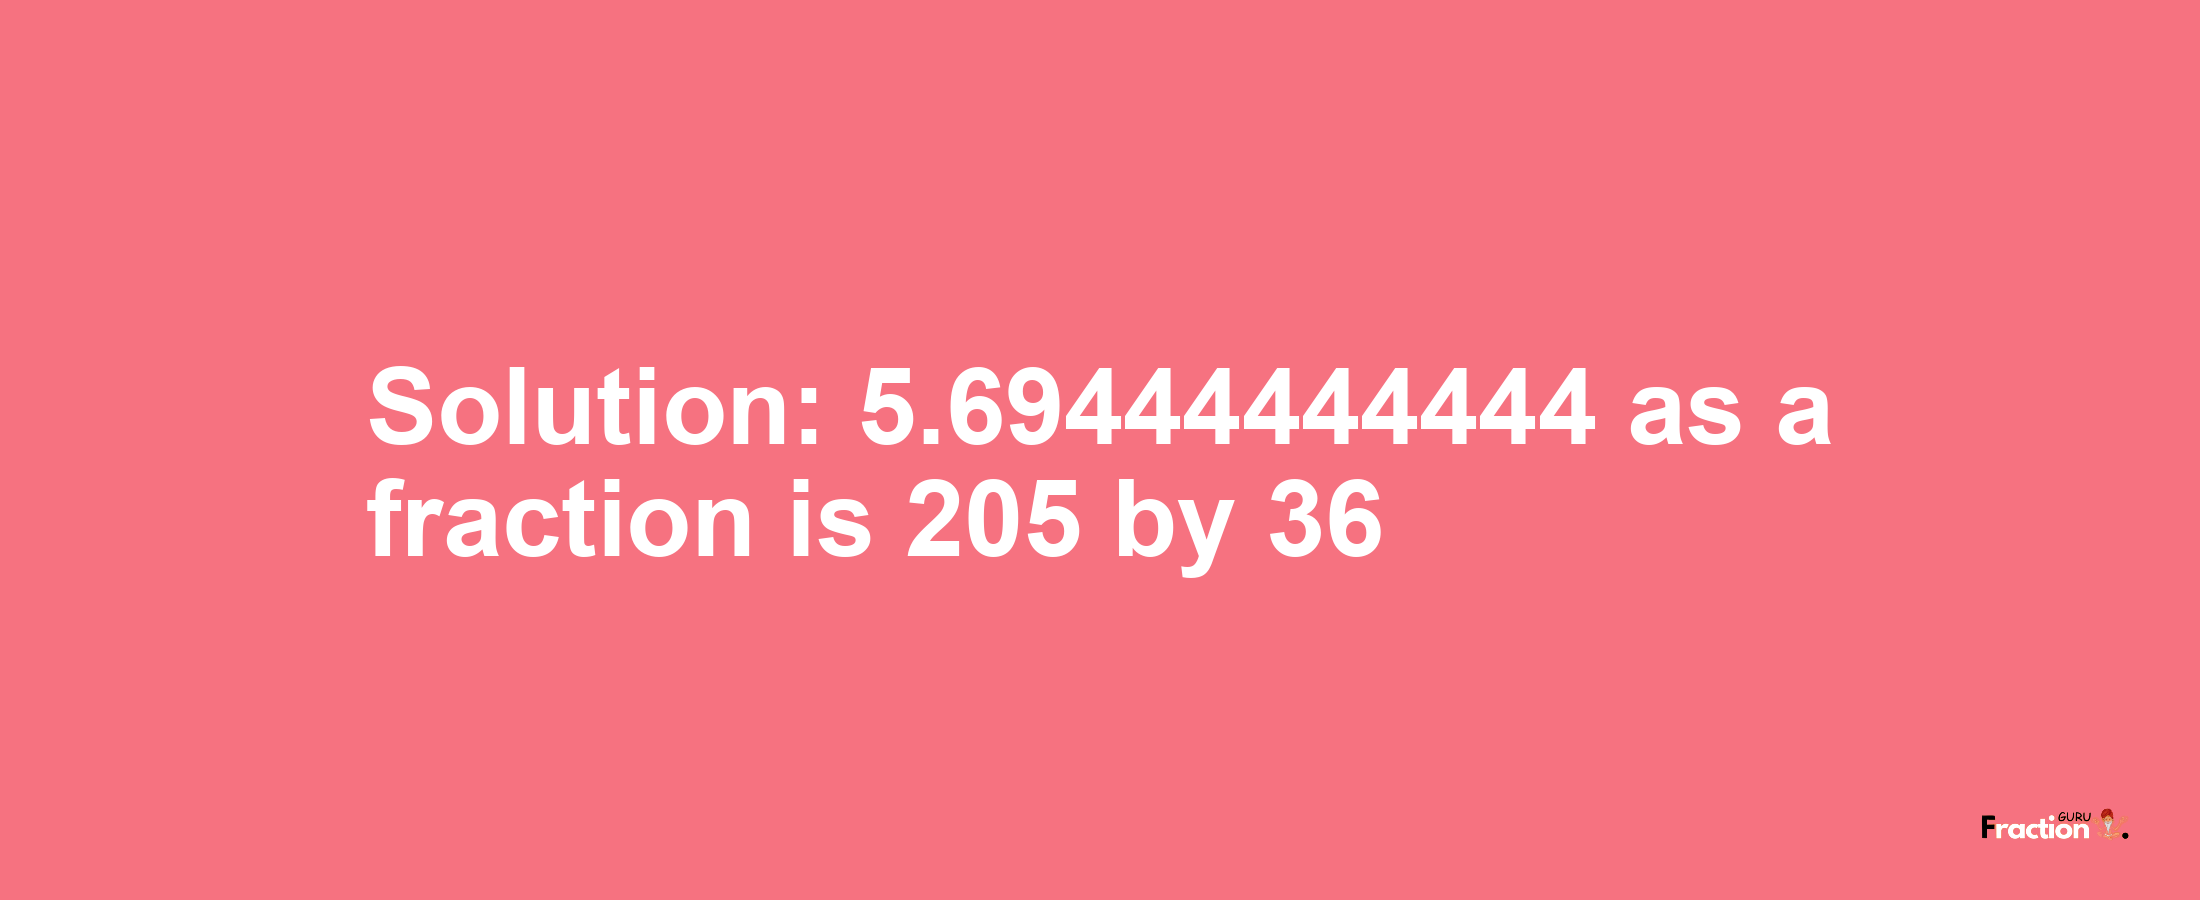 Solution:5.69444444444 as a fraction is 205/36